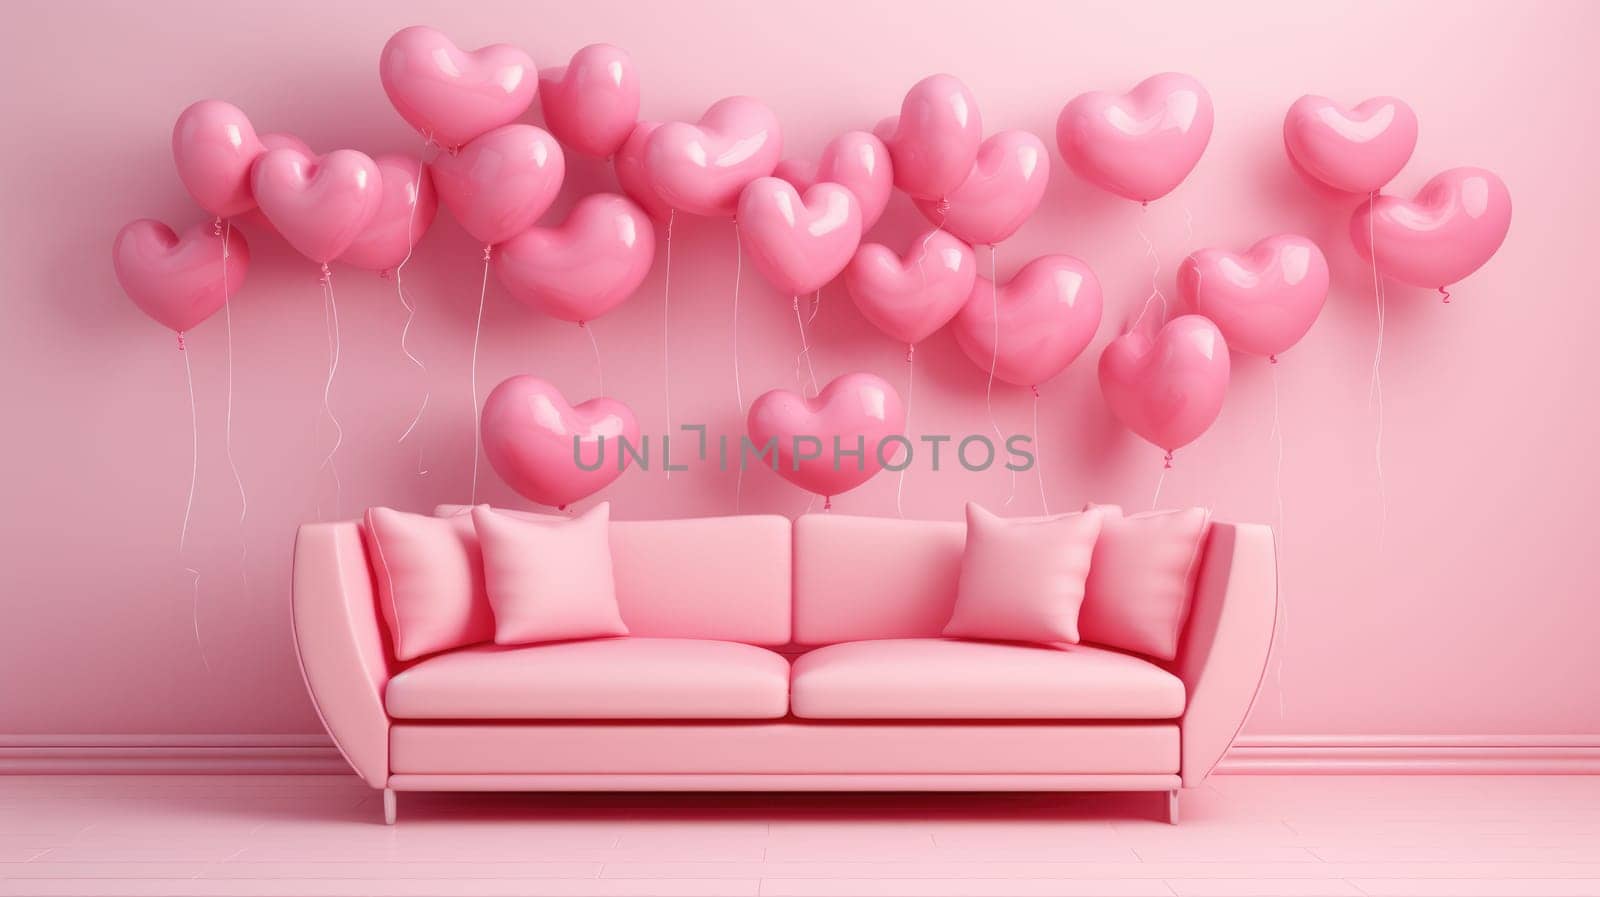 Pink sofa and heart-shaped balloons, on a pink background AI